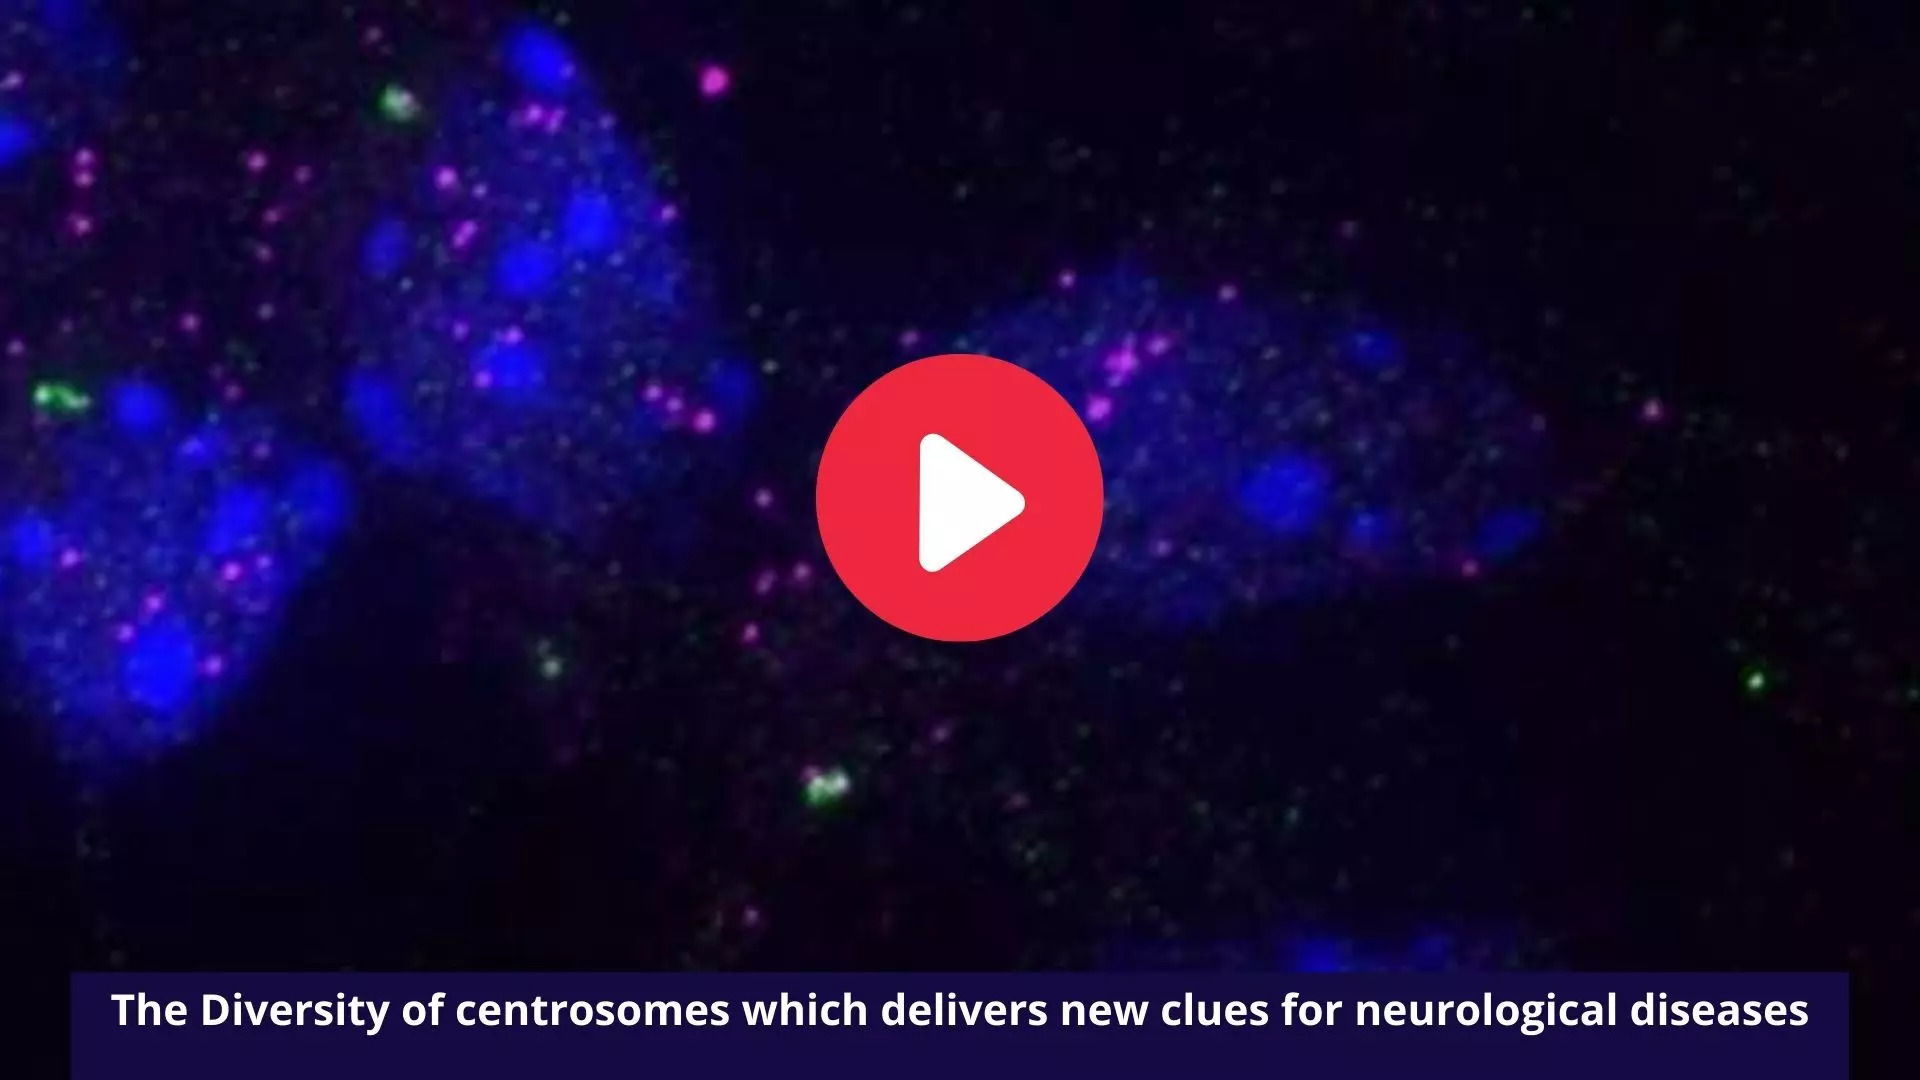 The Diversity of centrosomes which delivers new clues for neurological diseases